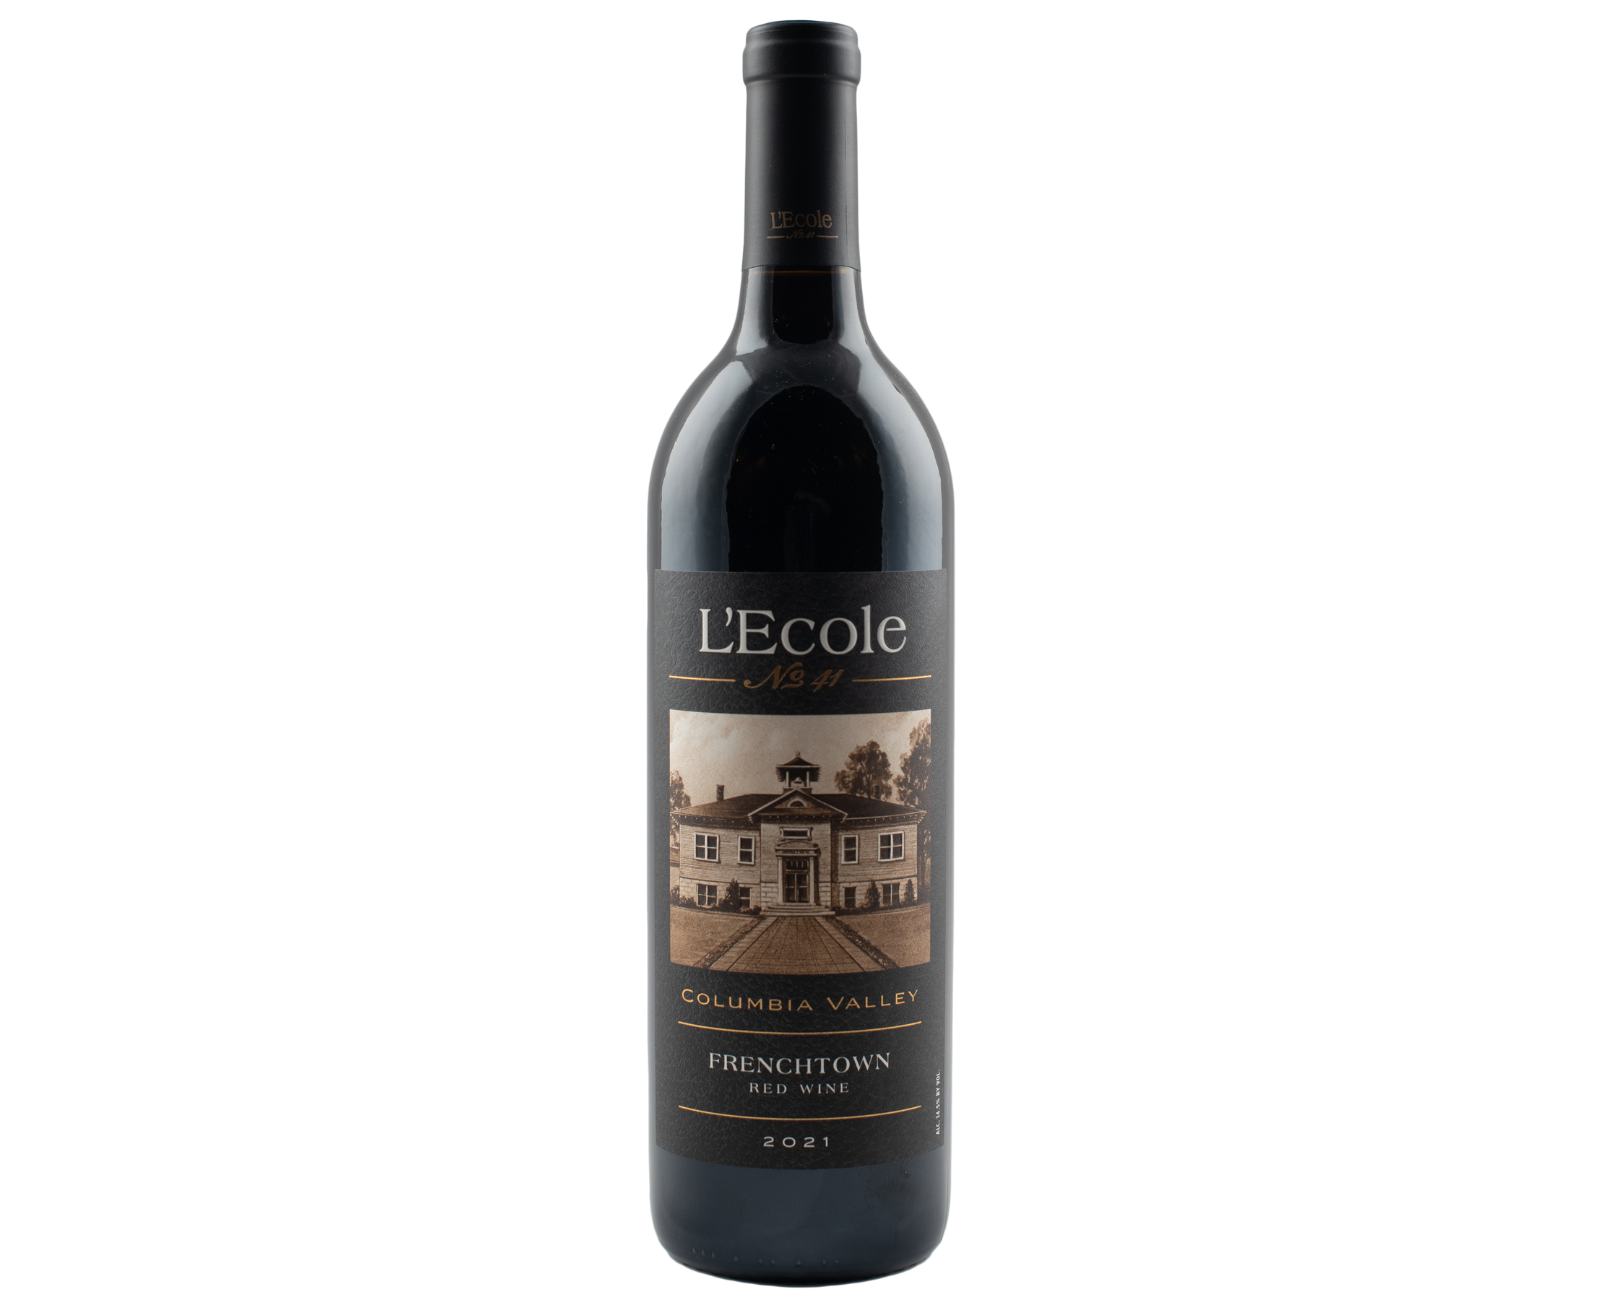 L'Ecole 2021 Frenchtown Red, Columbia Valley